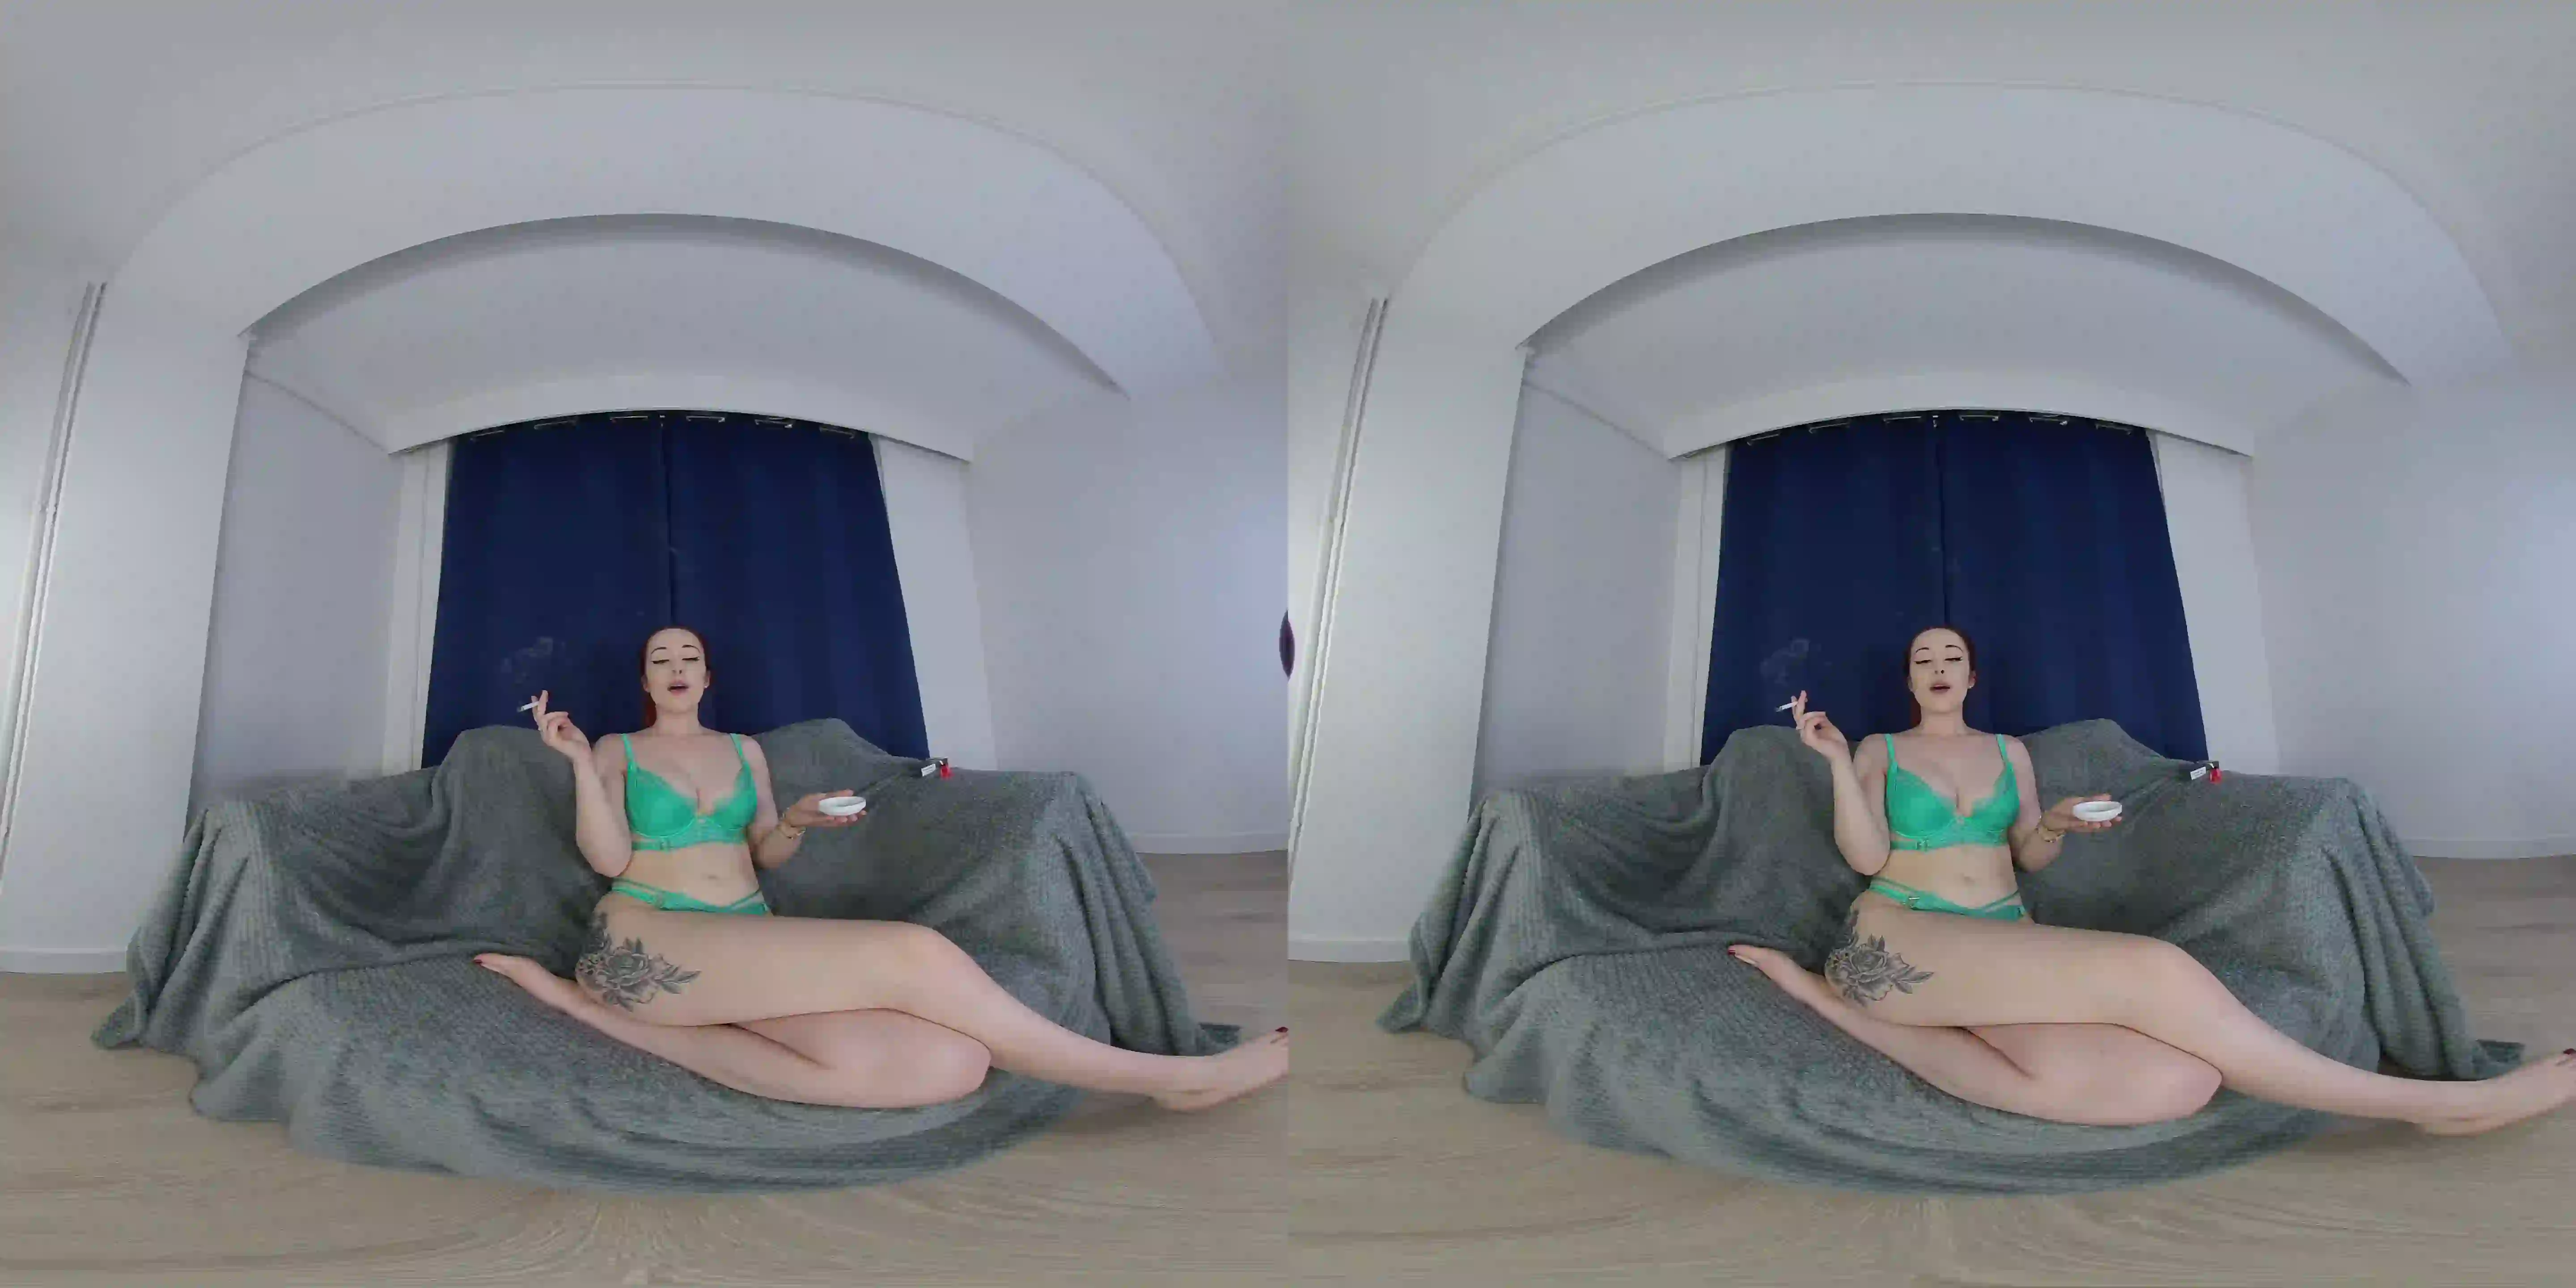 VRSmokers 22 09 12 Elle Louise Smoking In Green Lingerie XXX VR180 2880p MP4-GUAH